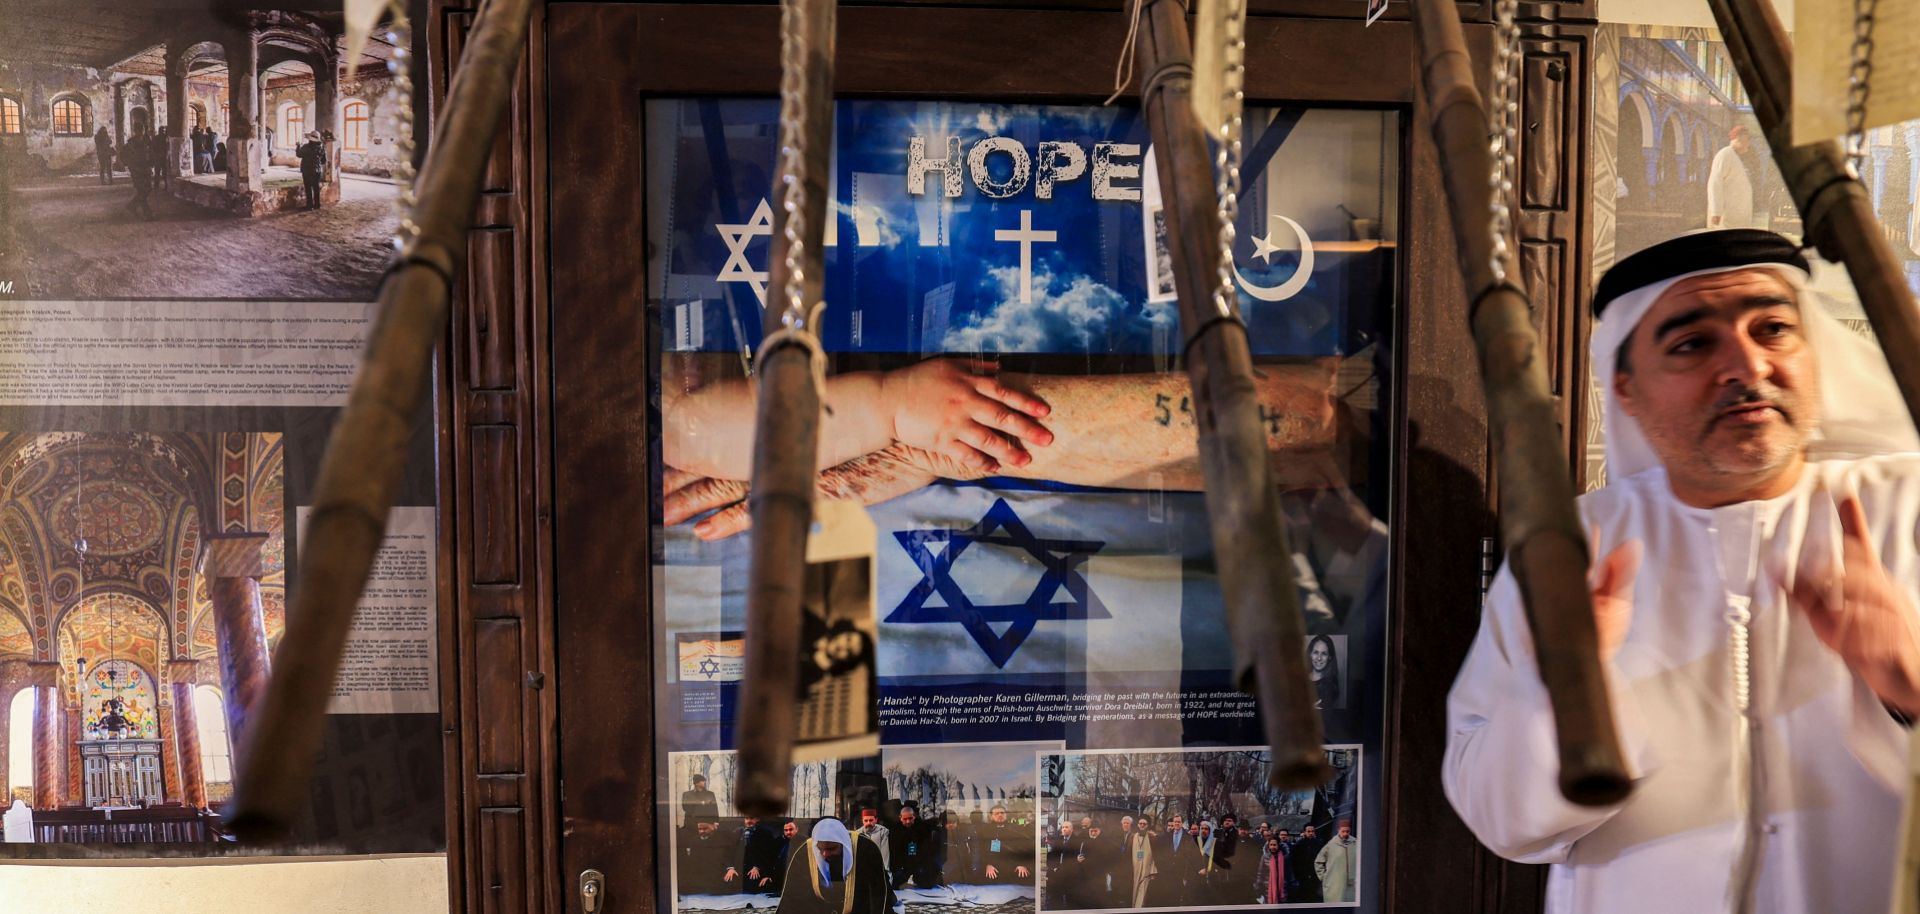 The director of the Museum at the Crossroads of Civilizations in Dubai, United Arab Emirates, shows visitors the facility's Holocaust gallery, January 11, 2023.